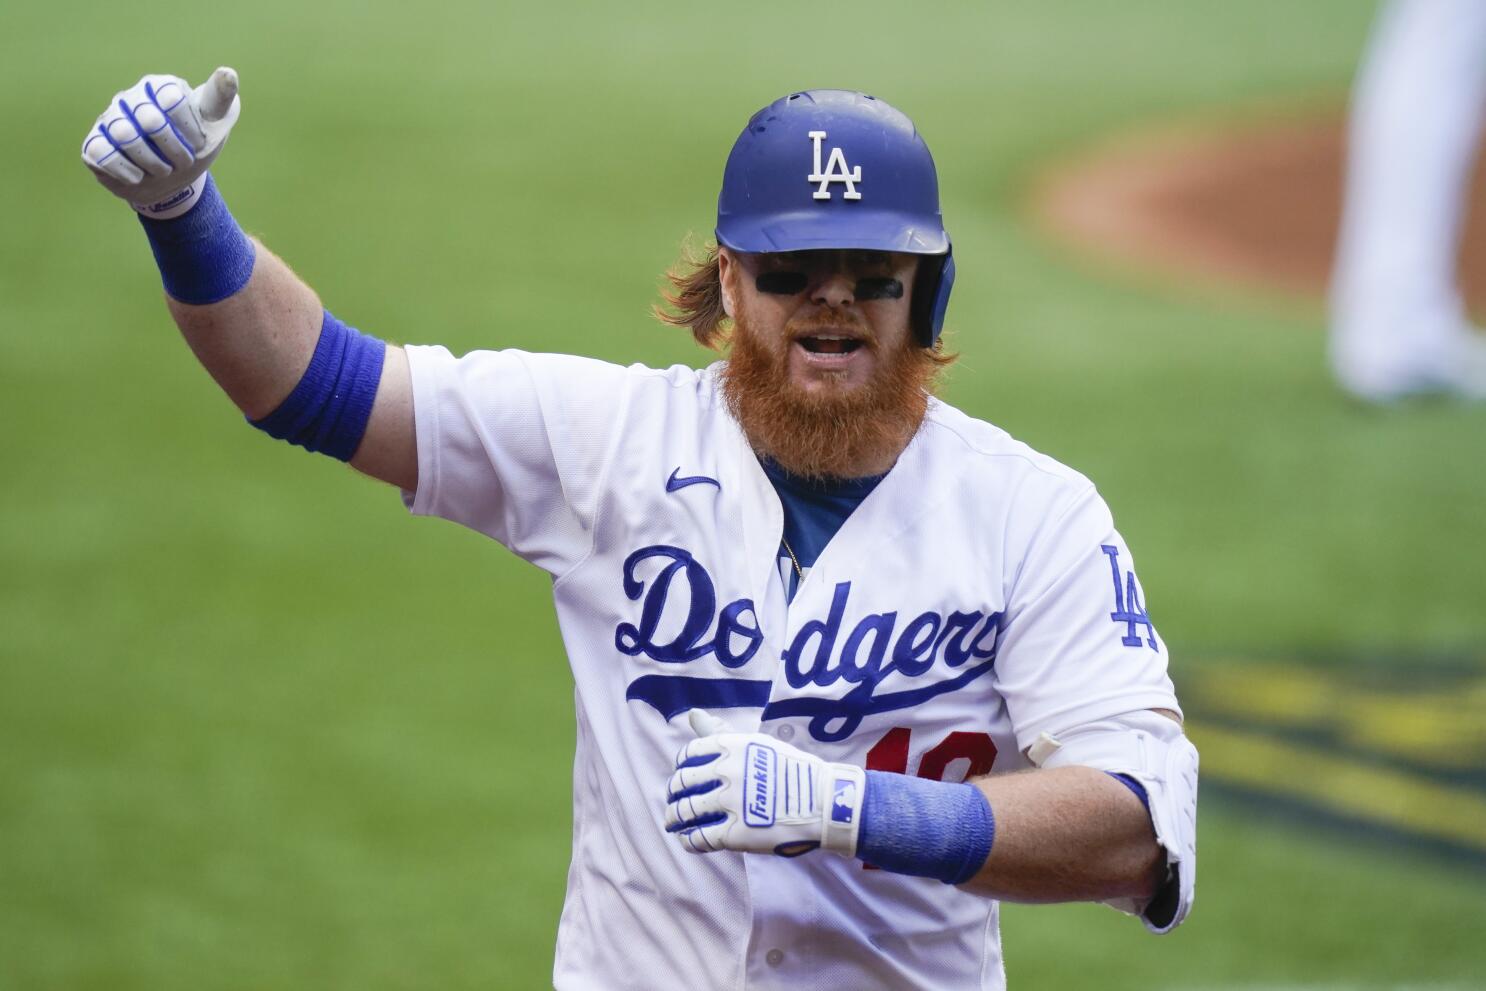 Dodgers Dugout: Justin Turner bids farewell to fans - Los Angeles